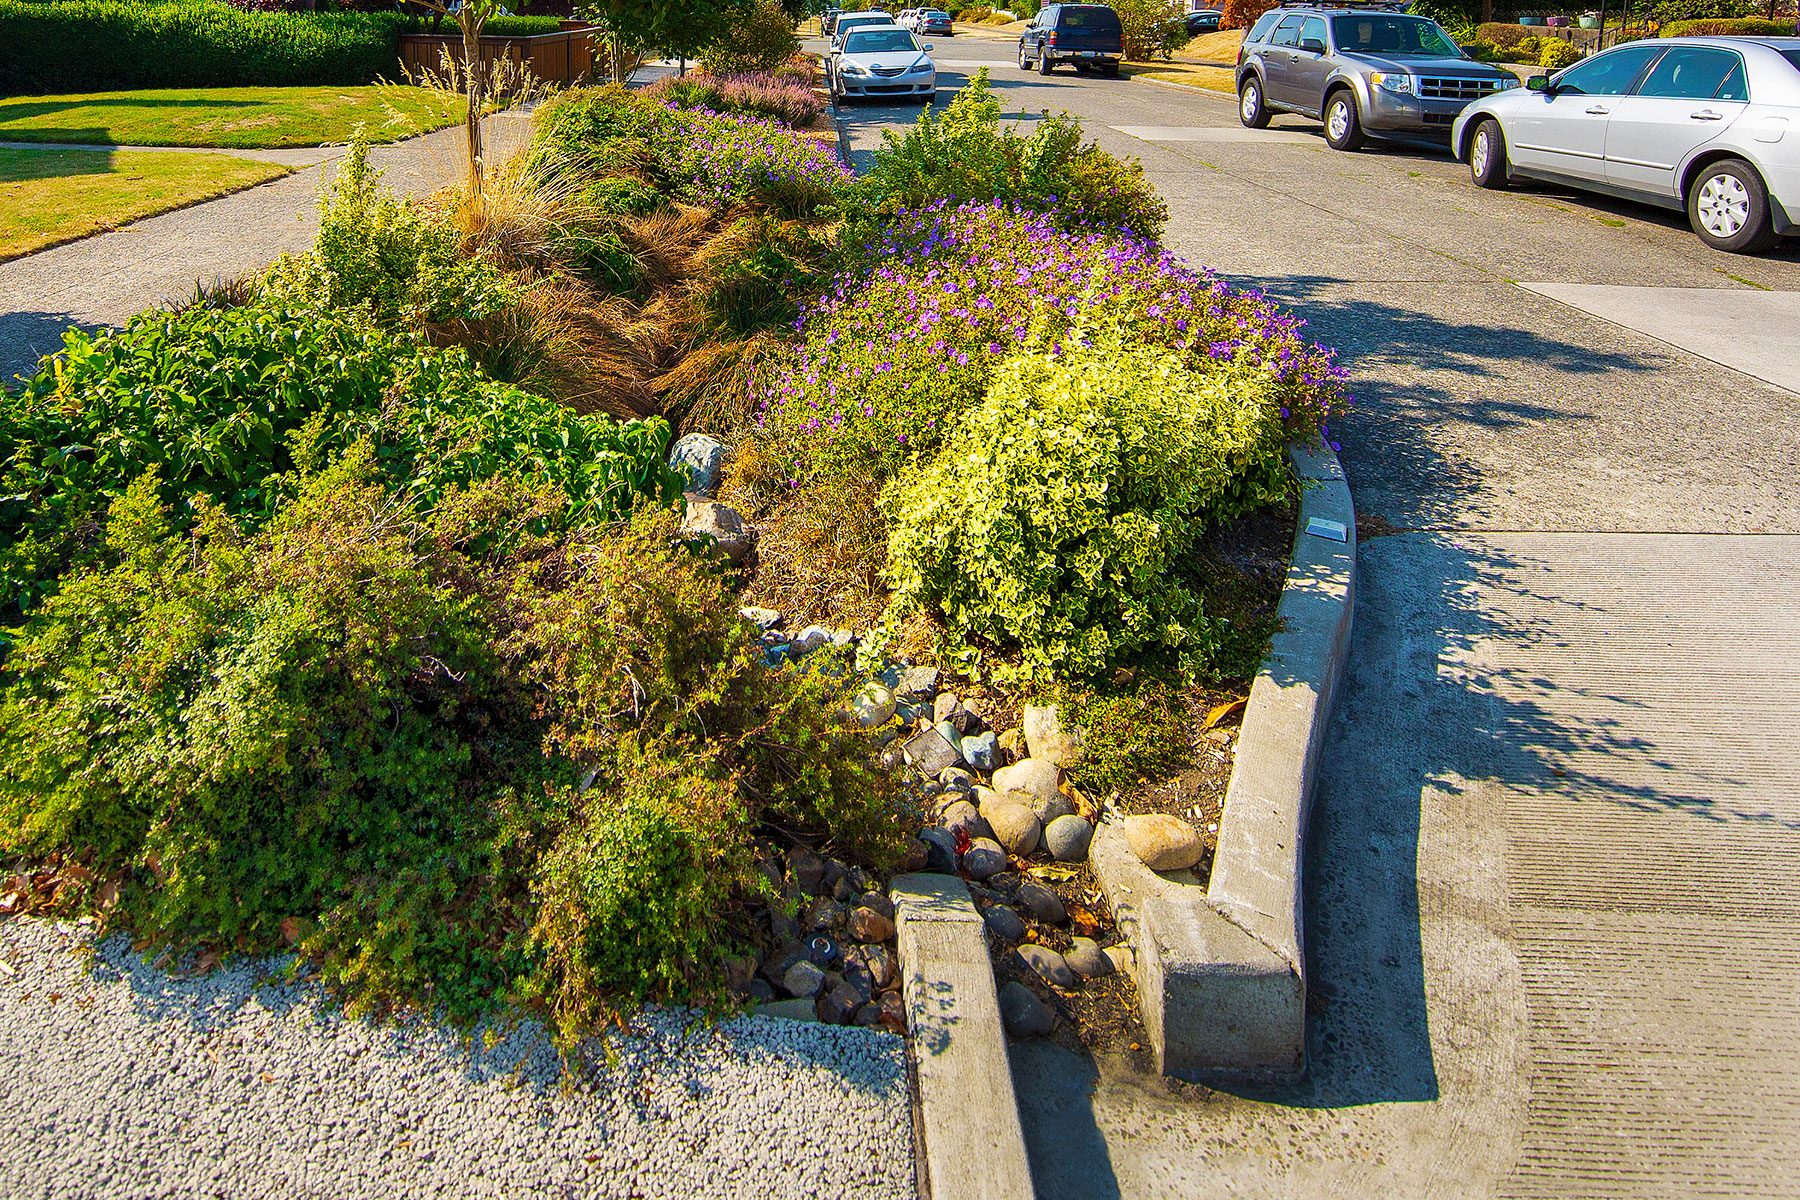 A Public Bioswale Made Of Drought Resistant Plants, Grasses, Rocks And Mulch.